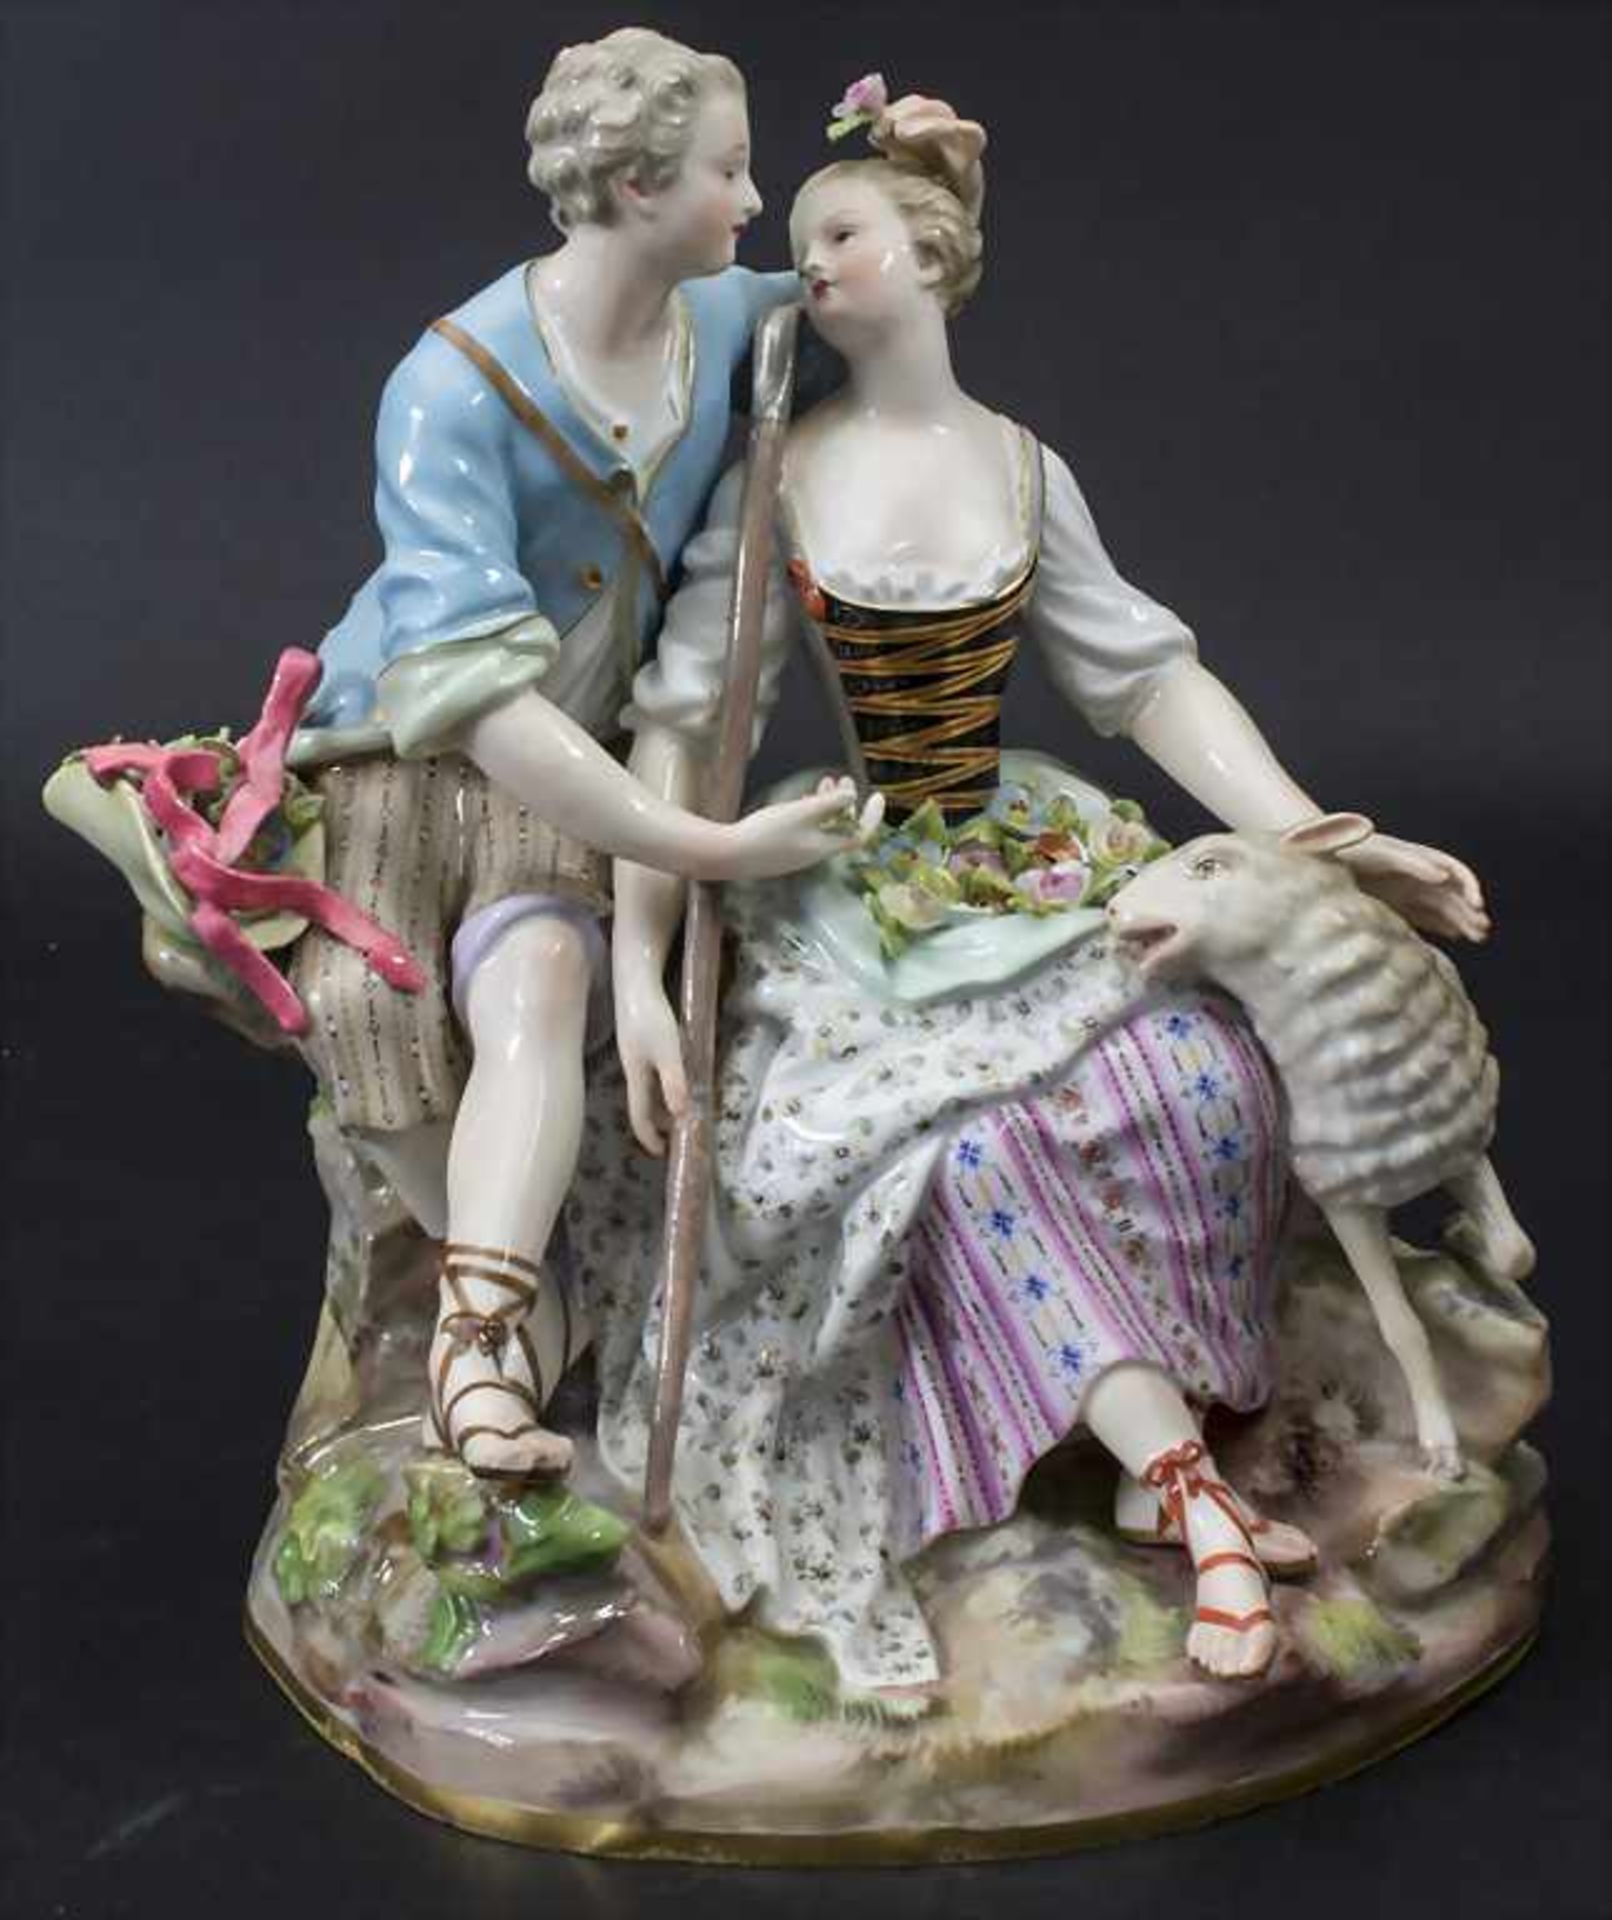 Schäfergruppe / A figural group with a shepherd and a shepherdess, Meissen, 19. Jh.